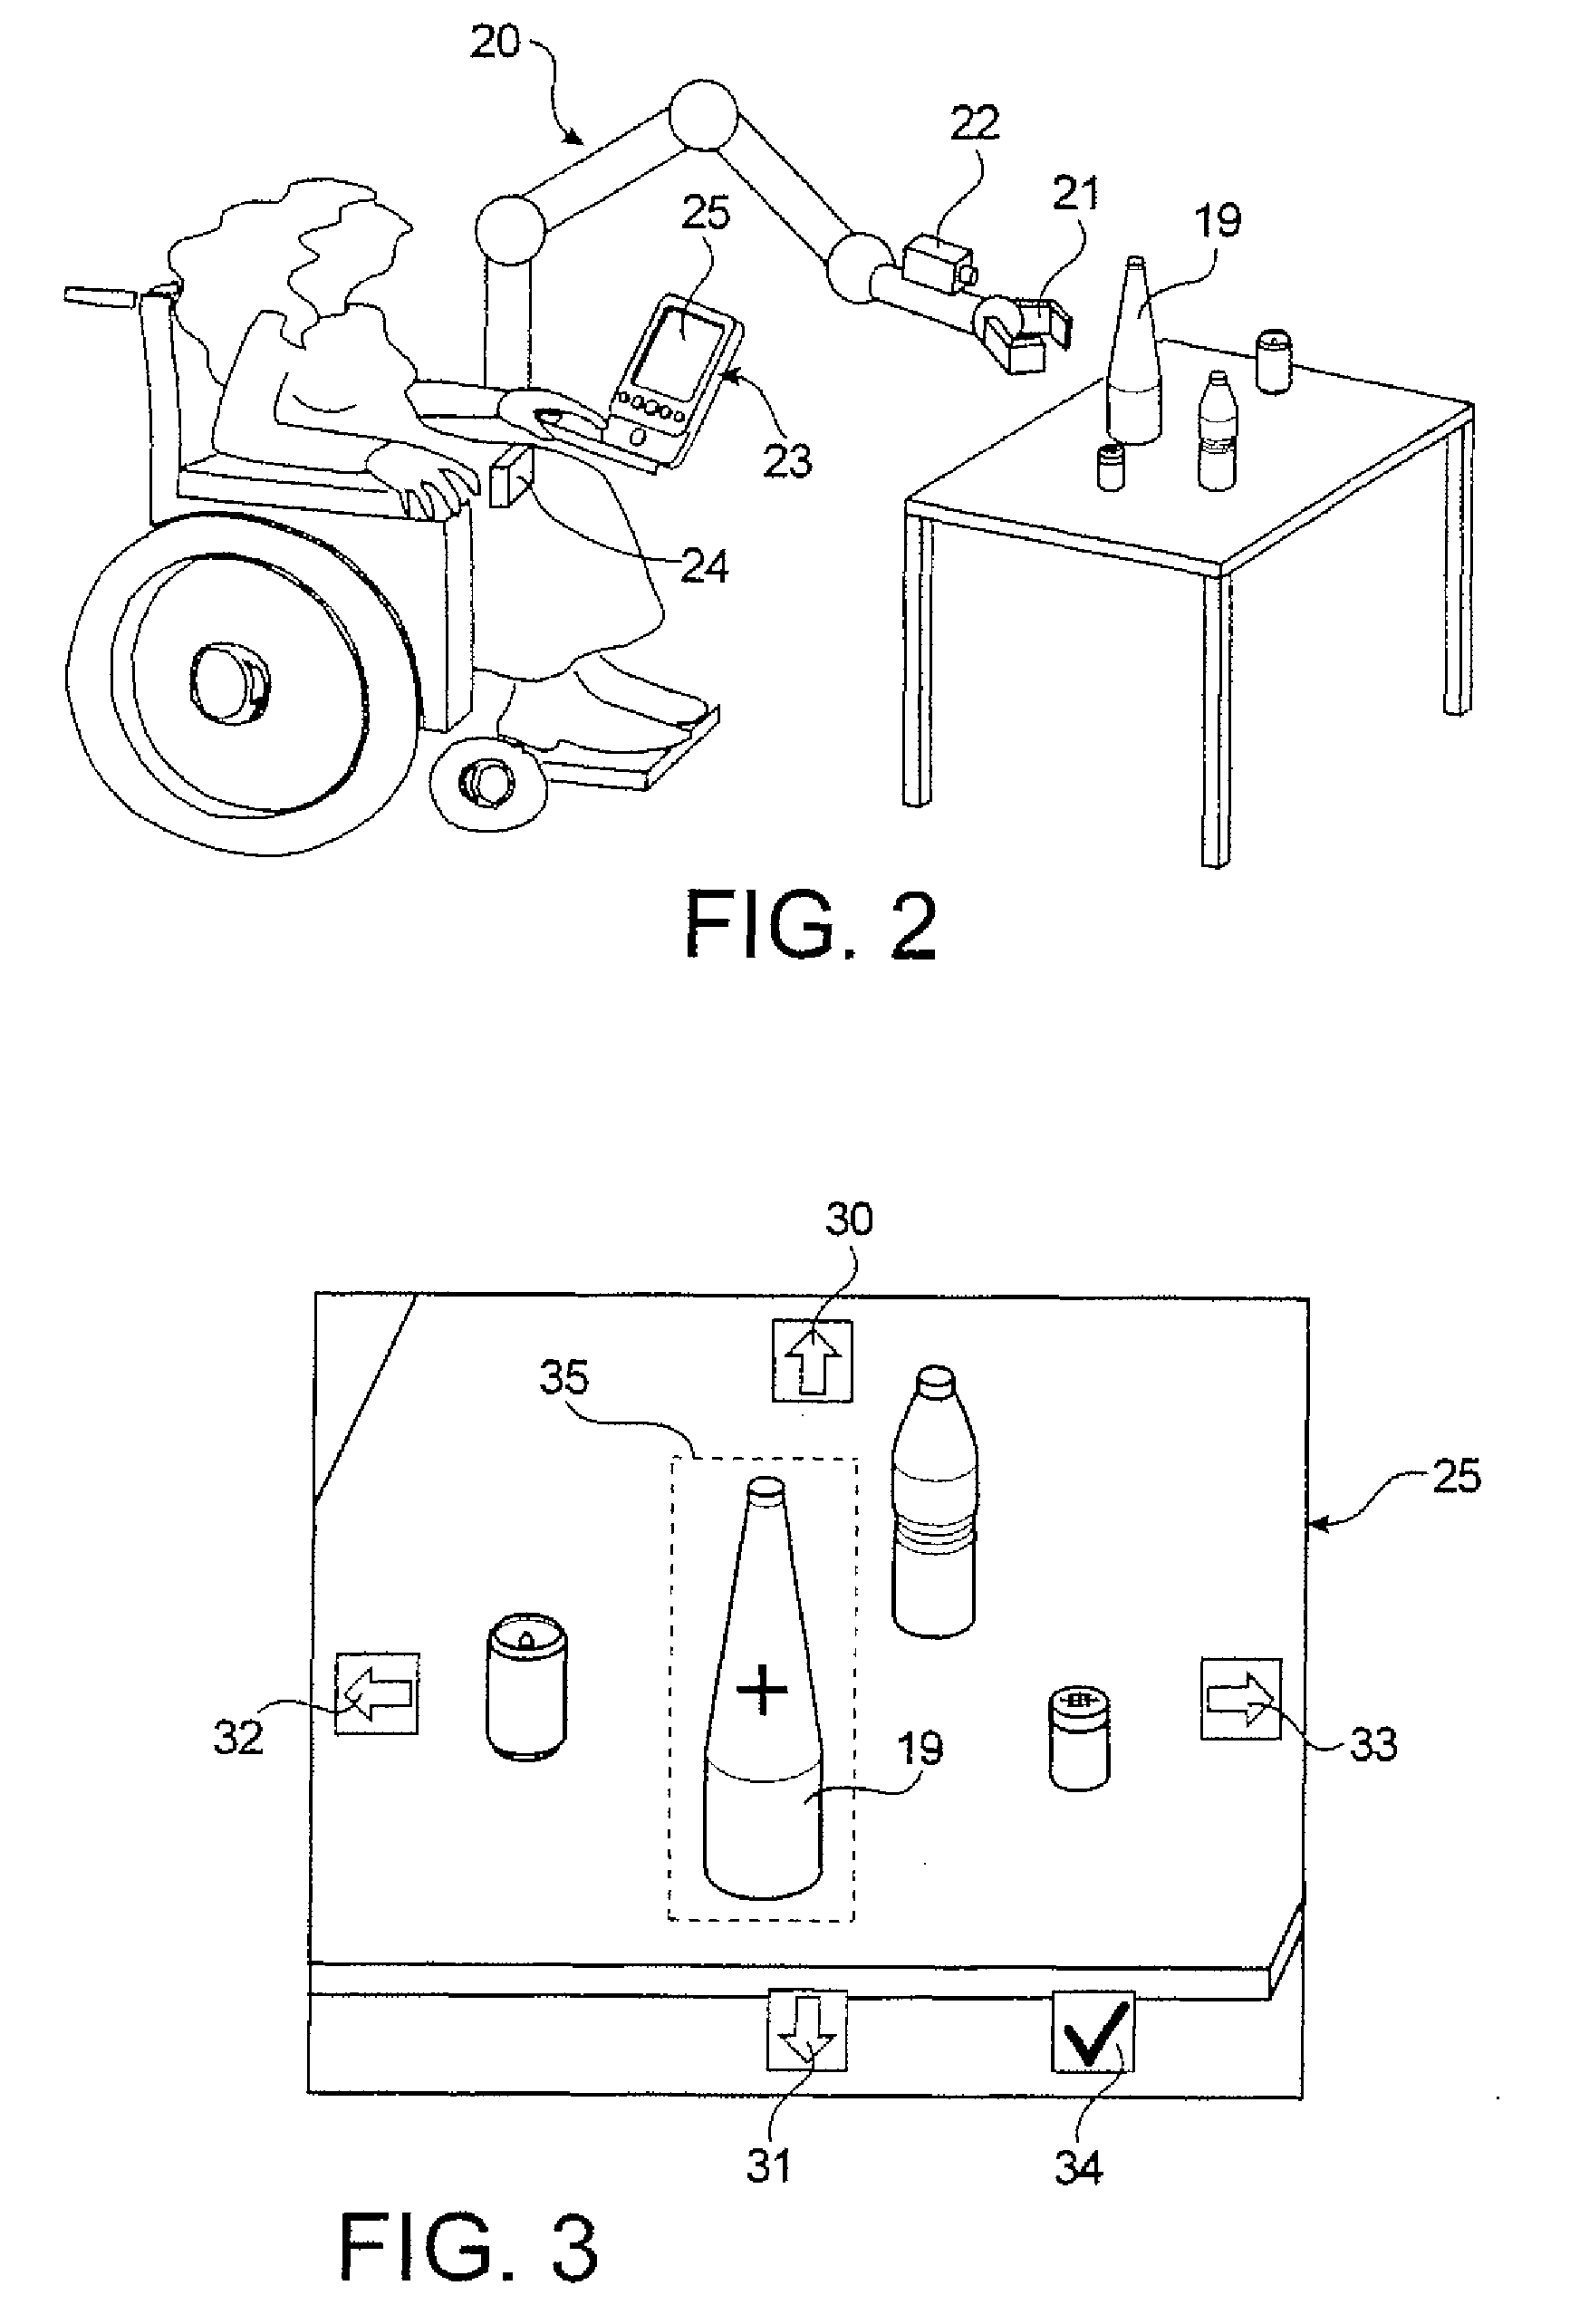 Intelligent interface device for grasping of an object by a manipulating robot and method of implementing this device